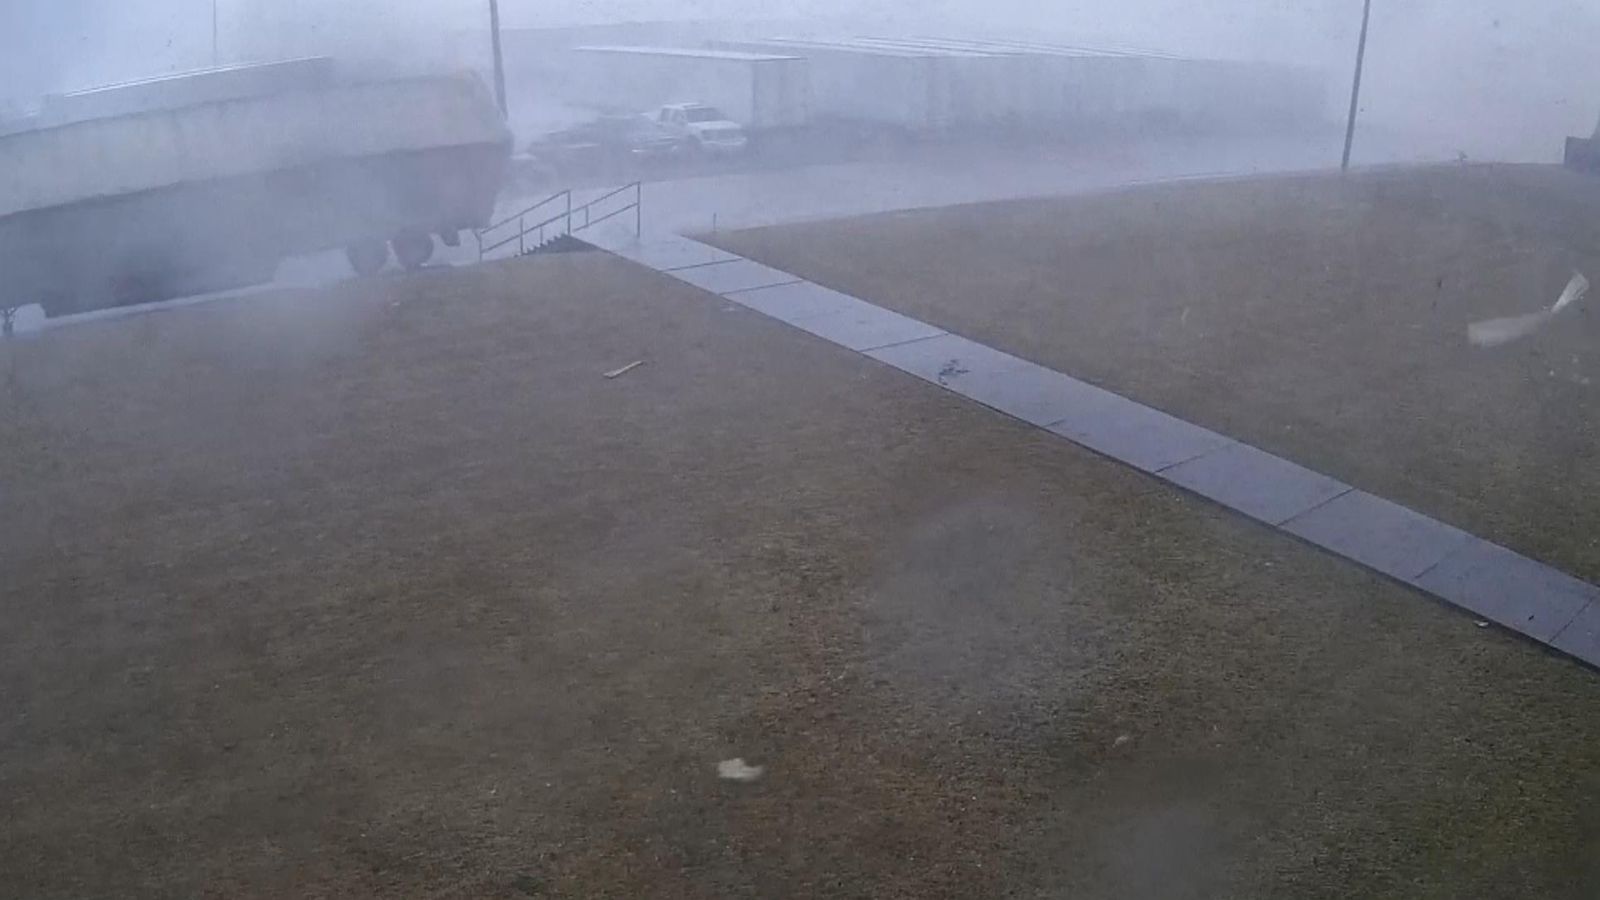 Moment huge tornado hits in US captured by CCTV camera US